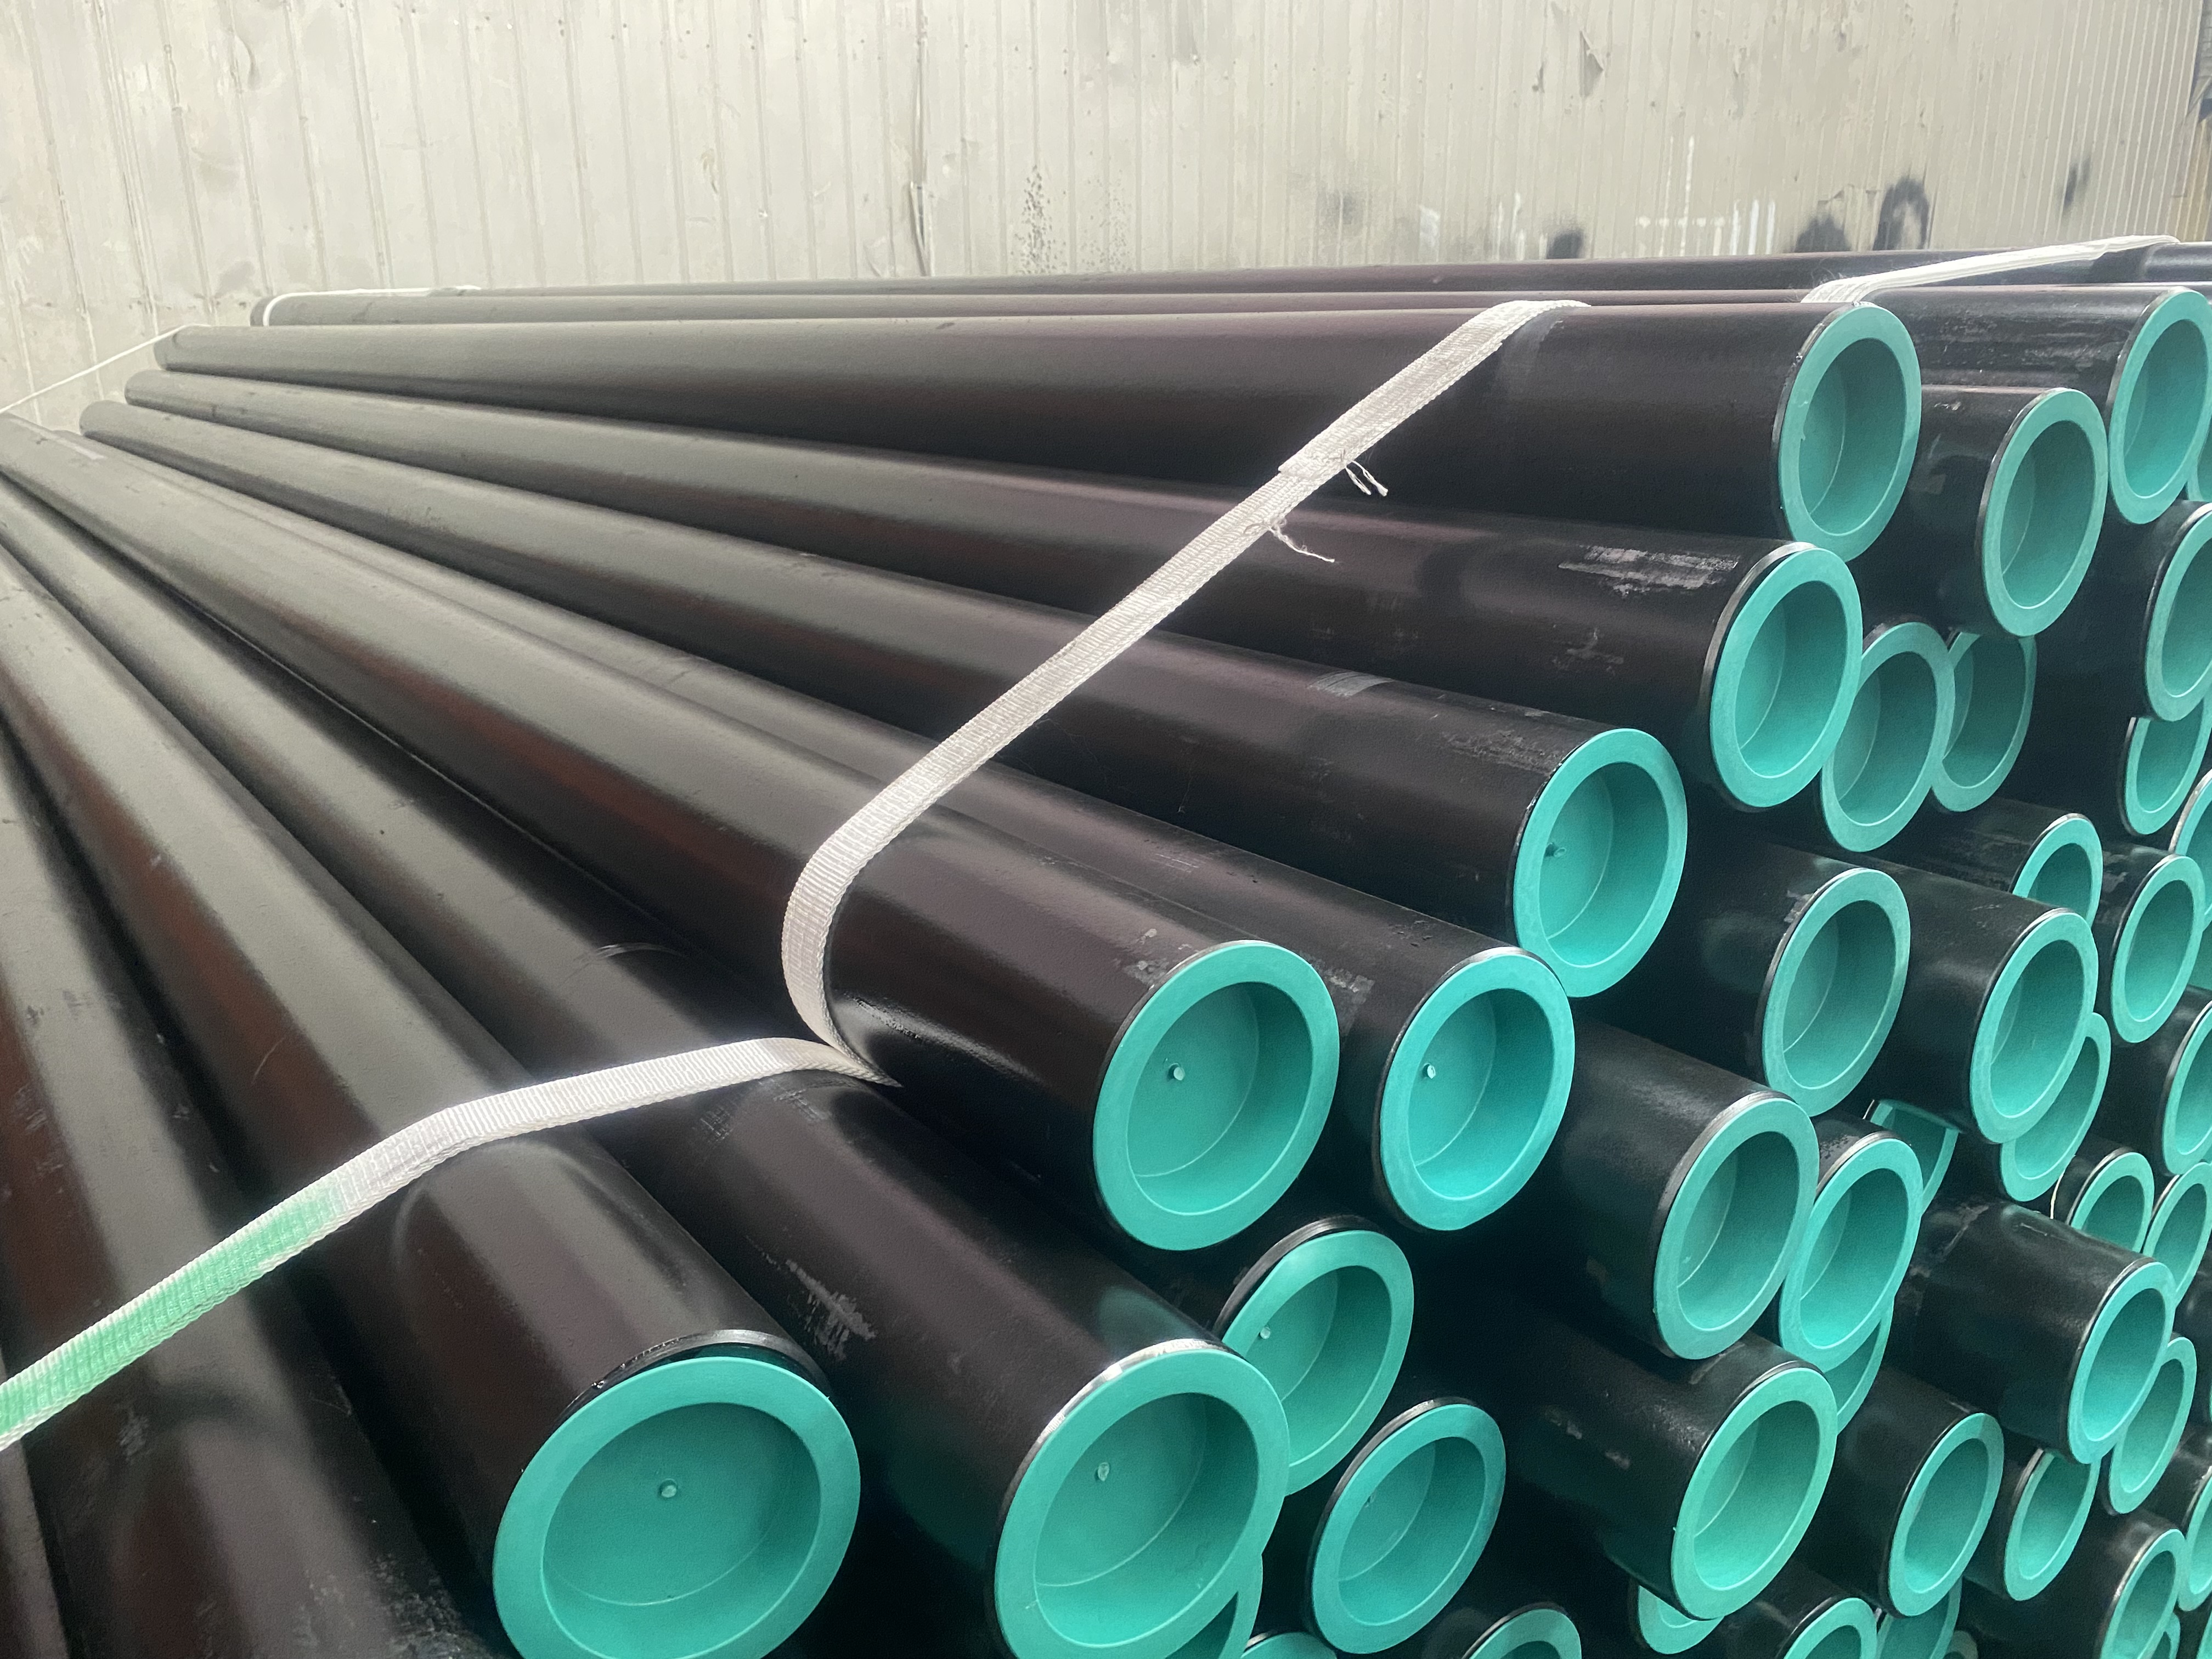 Quomodo Sina Seamless Pipe Industry ducit Global Market in invicta Price?